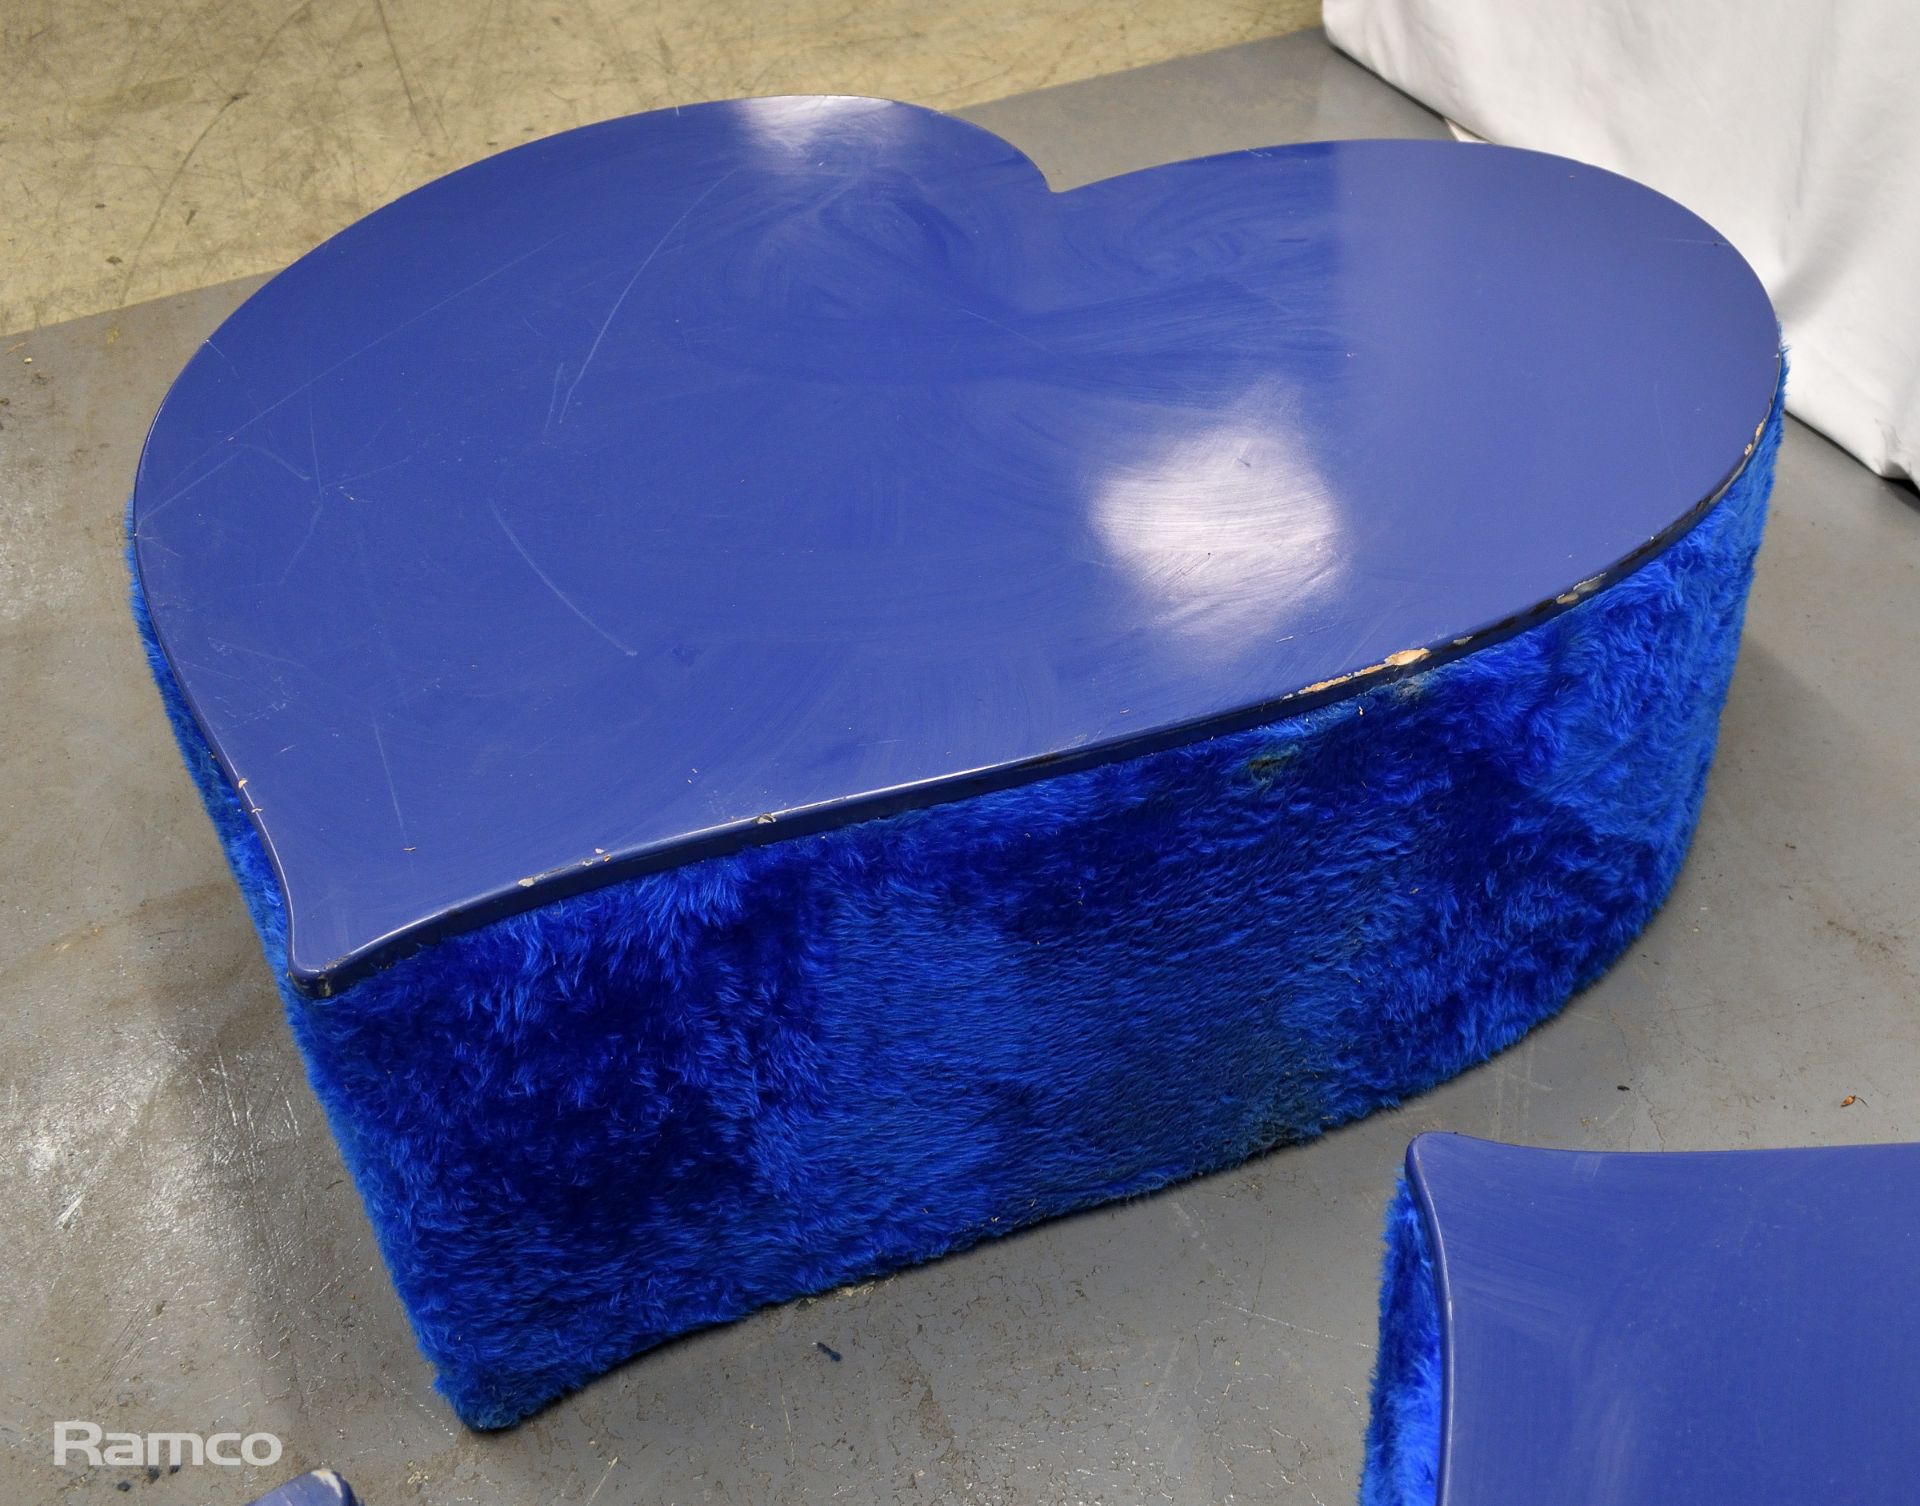 3x Asymmetrical heart shaped blue fur-covered wooden tables from countries' seating area - Image 4 of 13